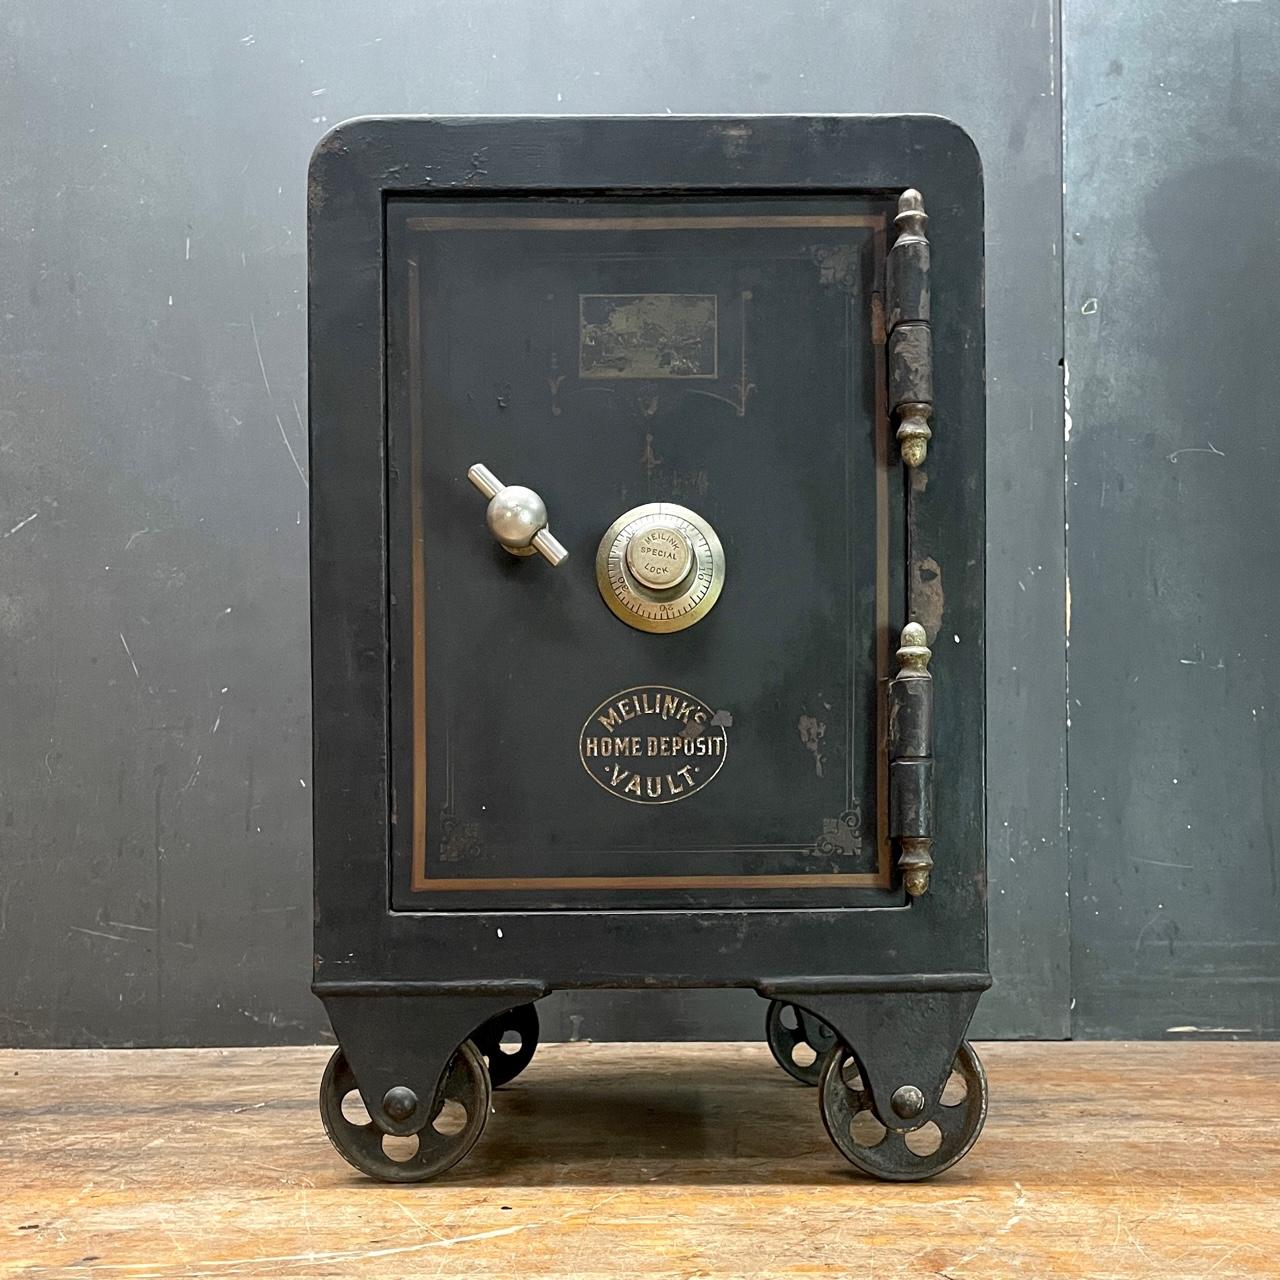 Small/Medium Home Vault or Iron Safe on Railroad (Inline Caster/Wheels.) It rolls smoothly, and has a working locking mechanism and comes with the correct combination to operate.  The safe is empty inside, could also be used as side table to